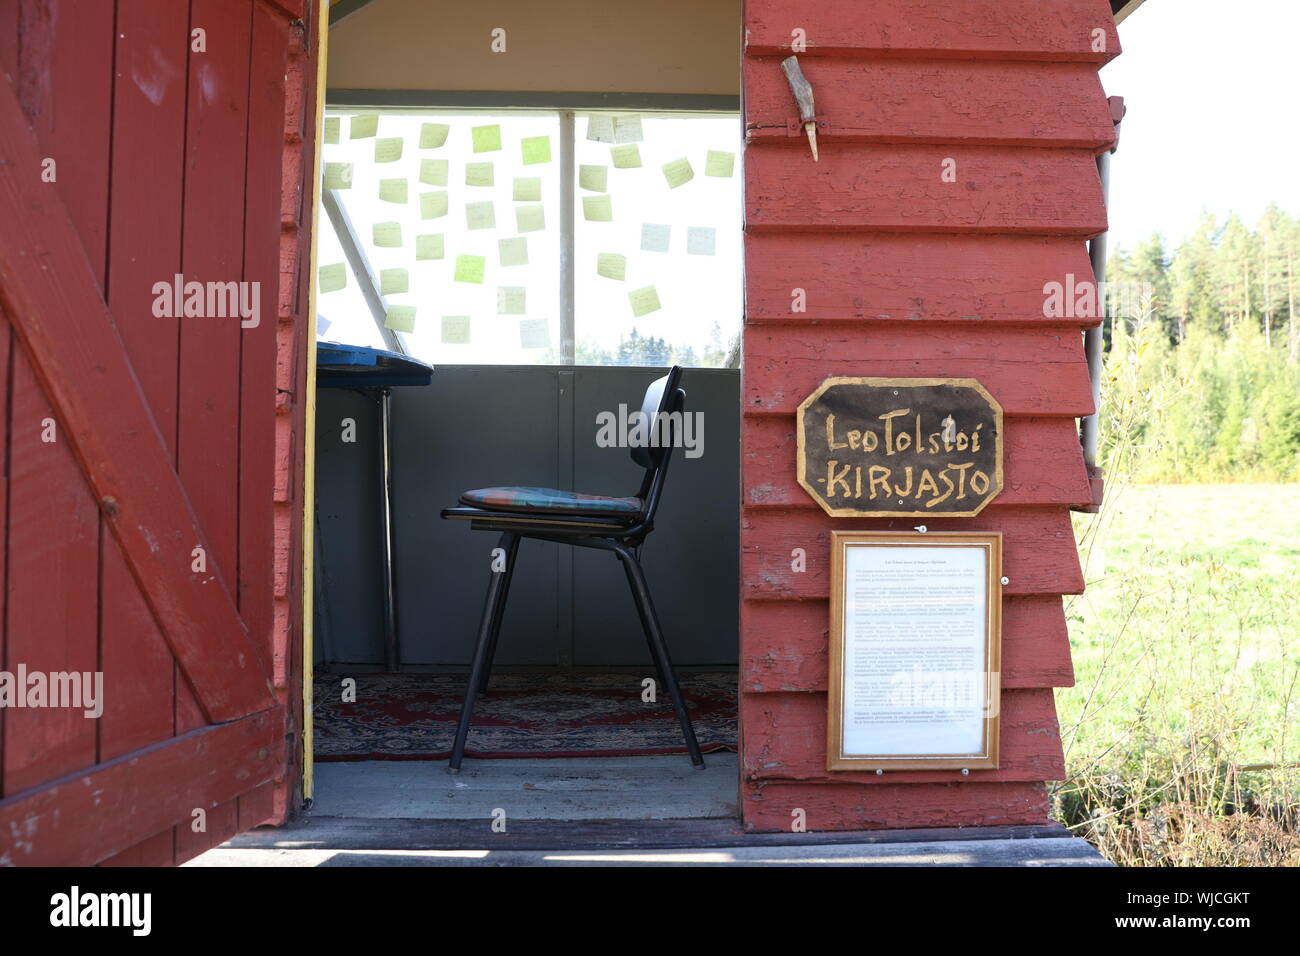 (190903) -- HELSINKI, Sept. 3, 2019 (Xinhua) -- Photo taken on Sept. 1, 2019 shows a tiny museum transformed from a milk platform in Velaatta village near Tampere, southern Finland. The museum used to be a milk platform where Finnish people would hand the full cans of milk and wait for lorries to collect them for the dairy. The museum, open to public free of charge from June 18 to Oct. 1 every year, stands for hard work and social change in Finland.   A question about what happy life is has been raised during an ongoing activity in the museum and visitors wrote down their answers on notes and Stock Photo